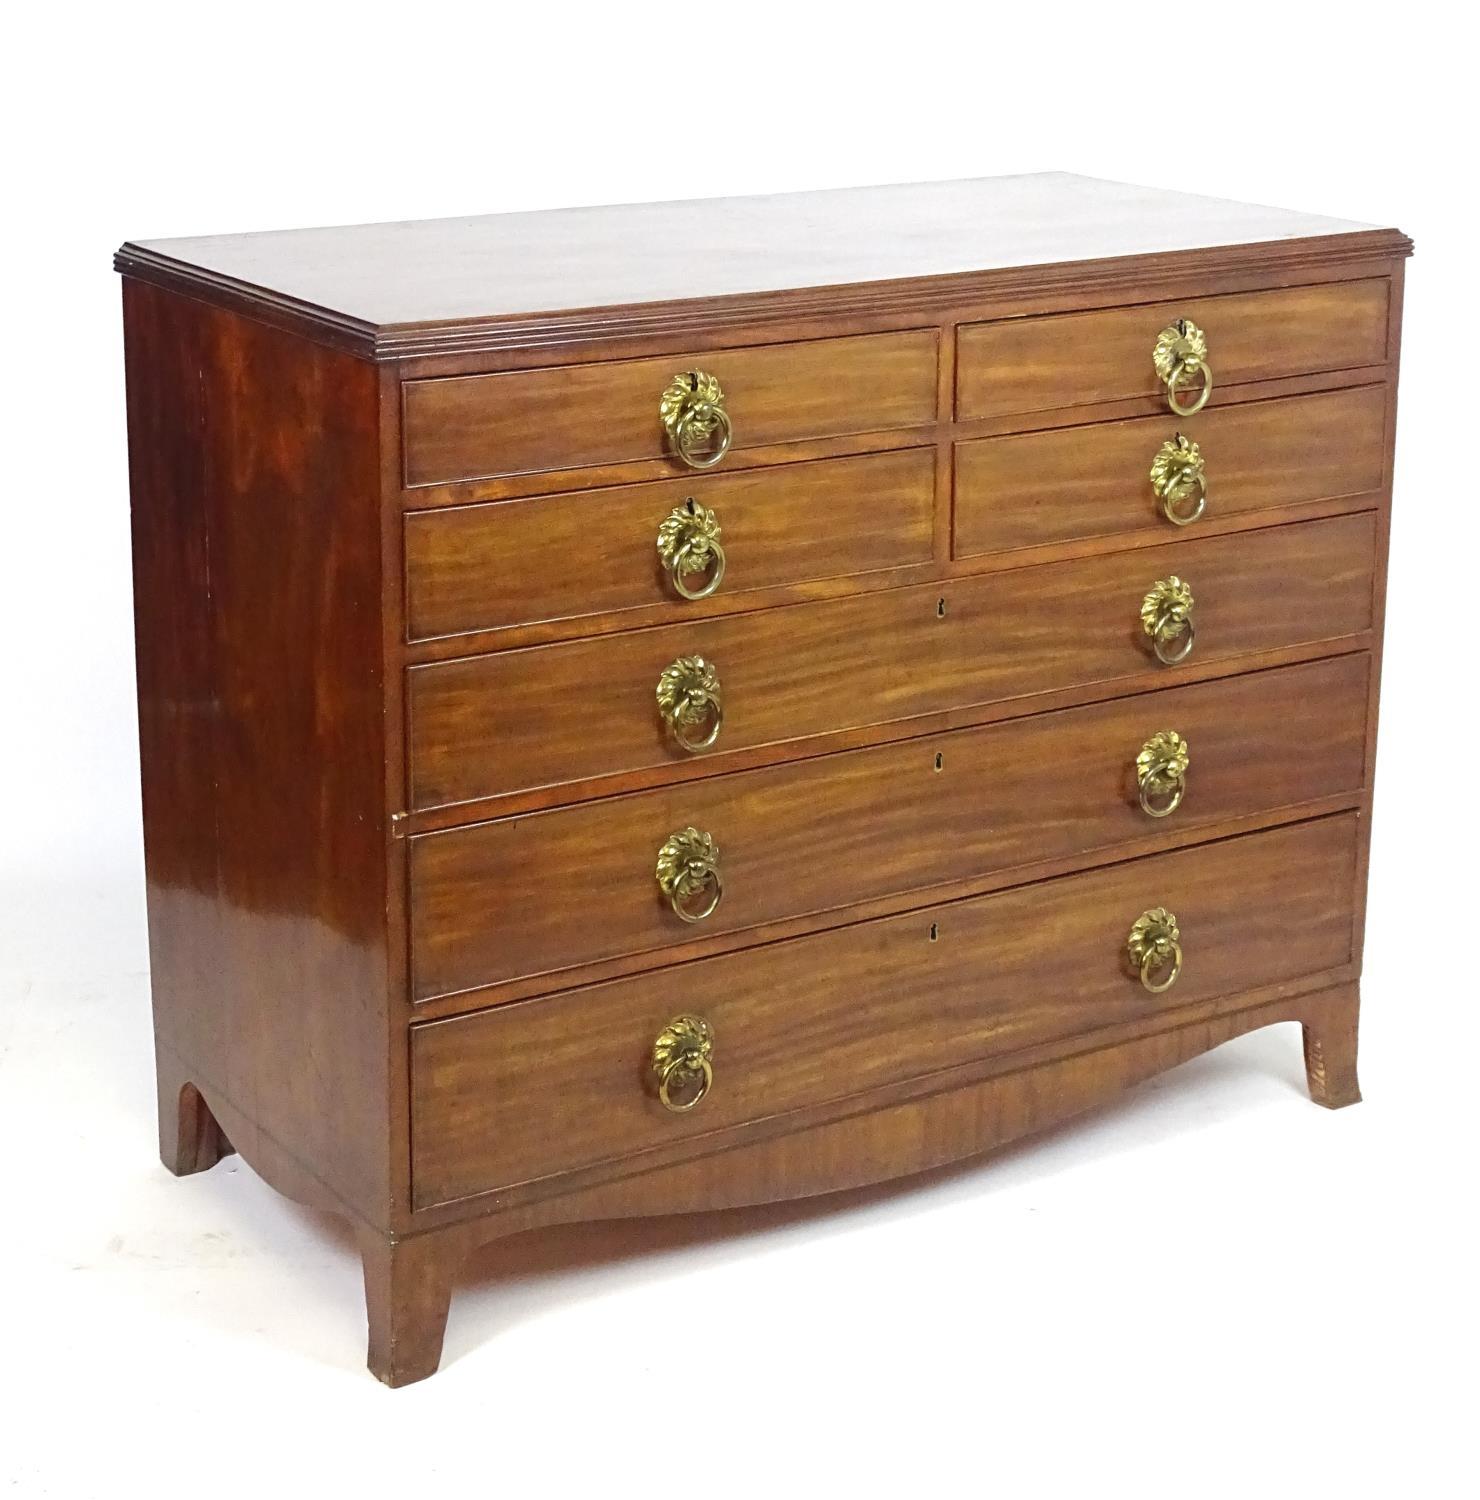 A mid 19thC mahogany chest of drawers with a rectangular reeded top above an unusual set of four